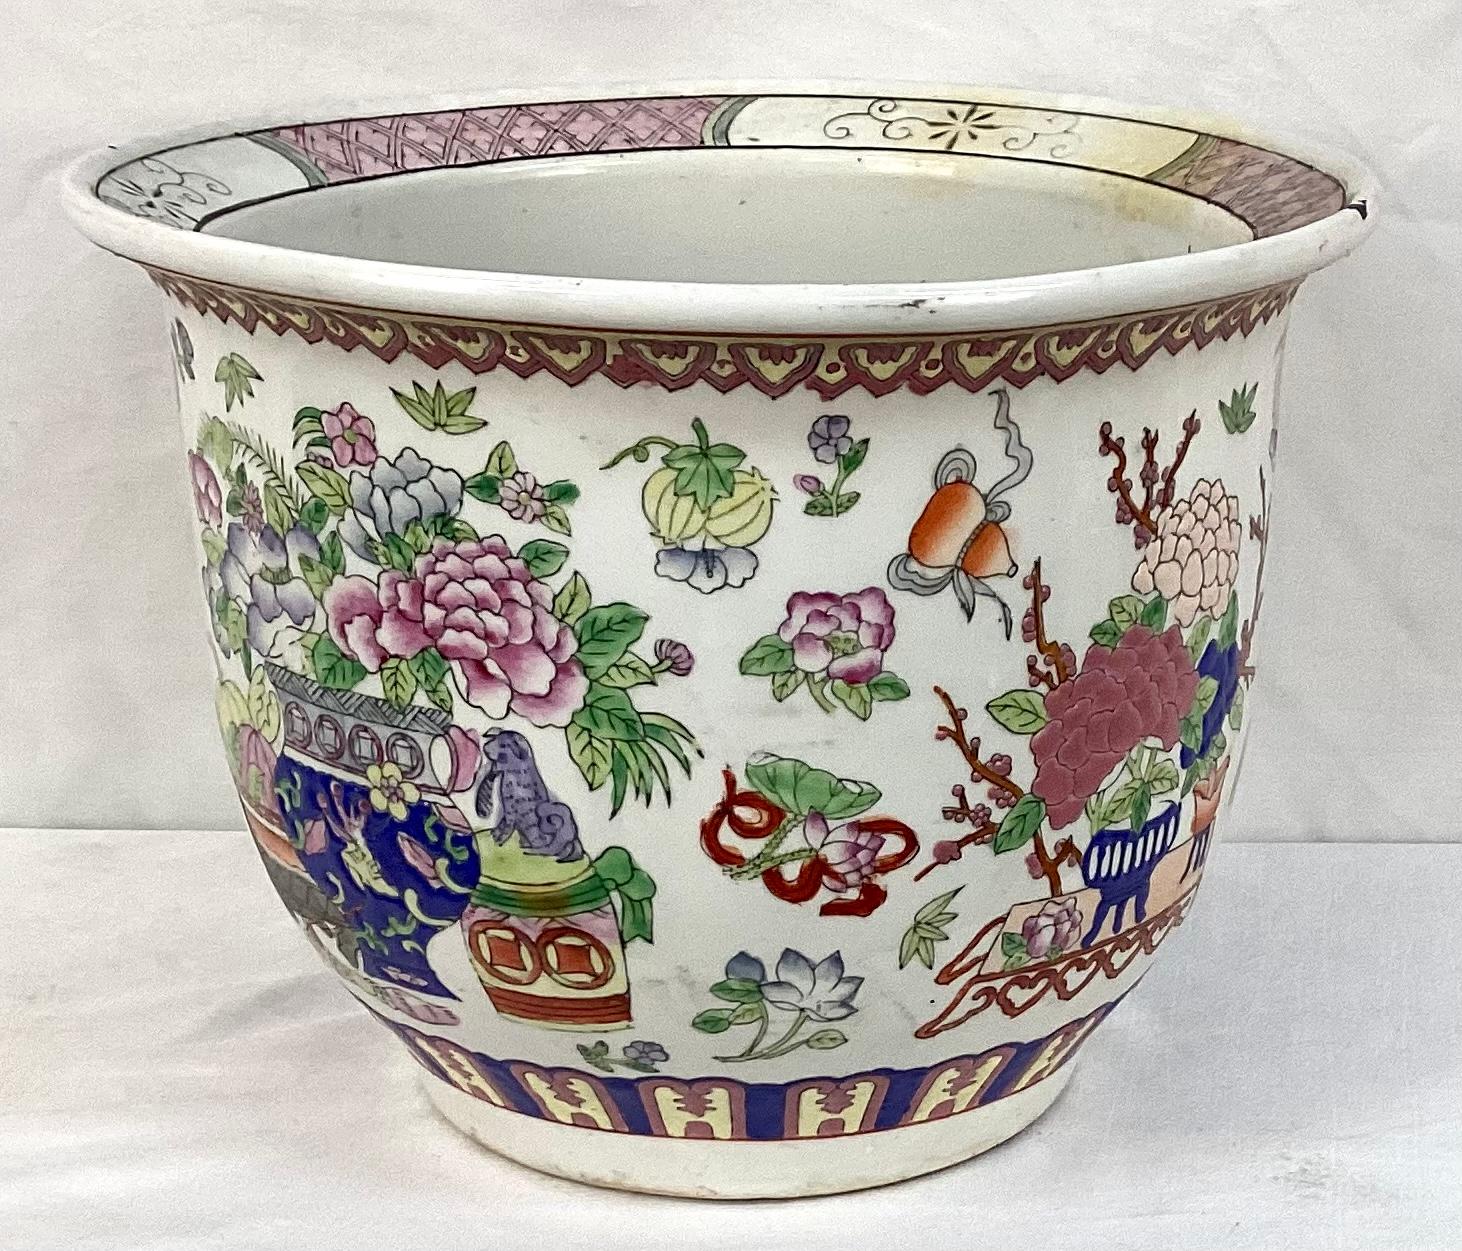 20th Century Large Chinese Porcelain Famille Rose Fish Bowl Planter For Sale